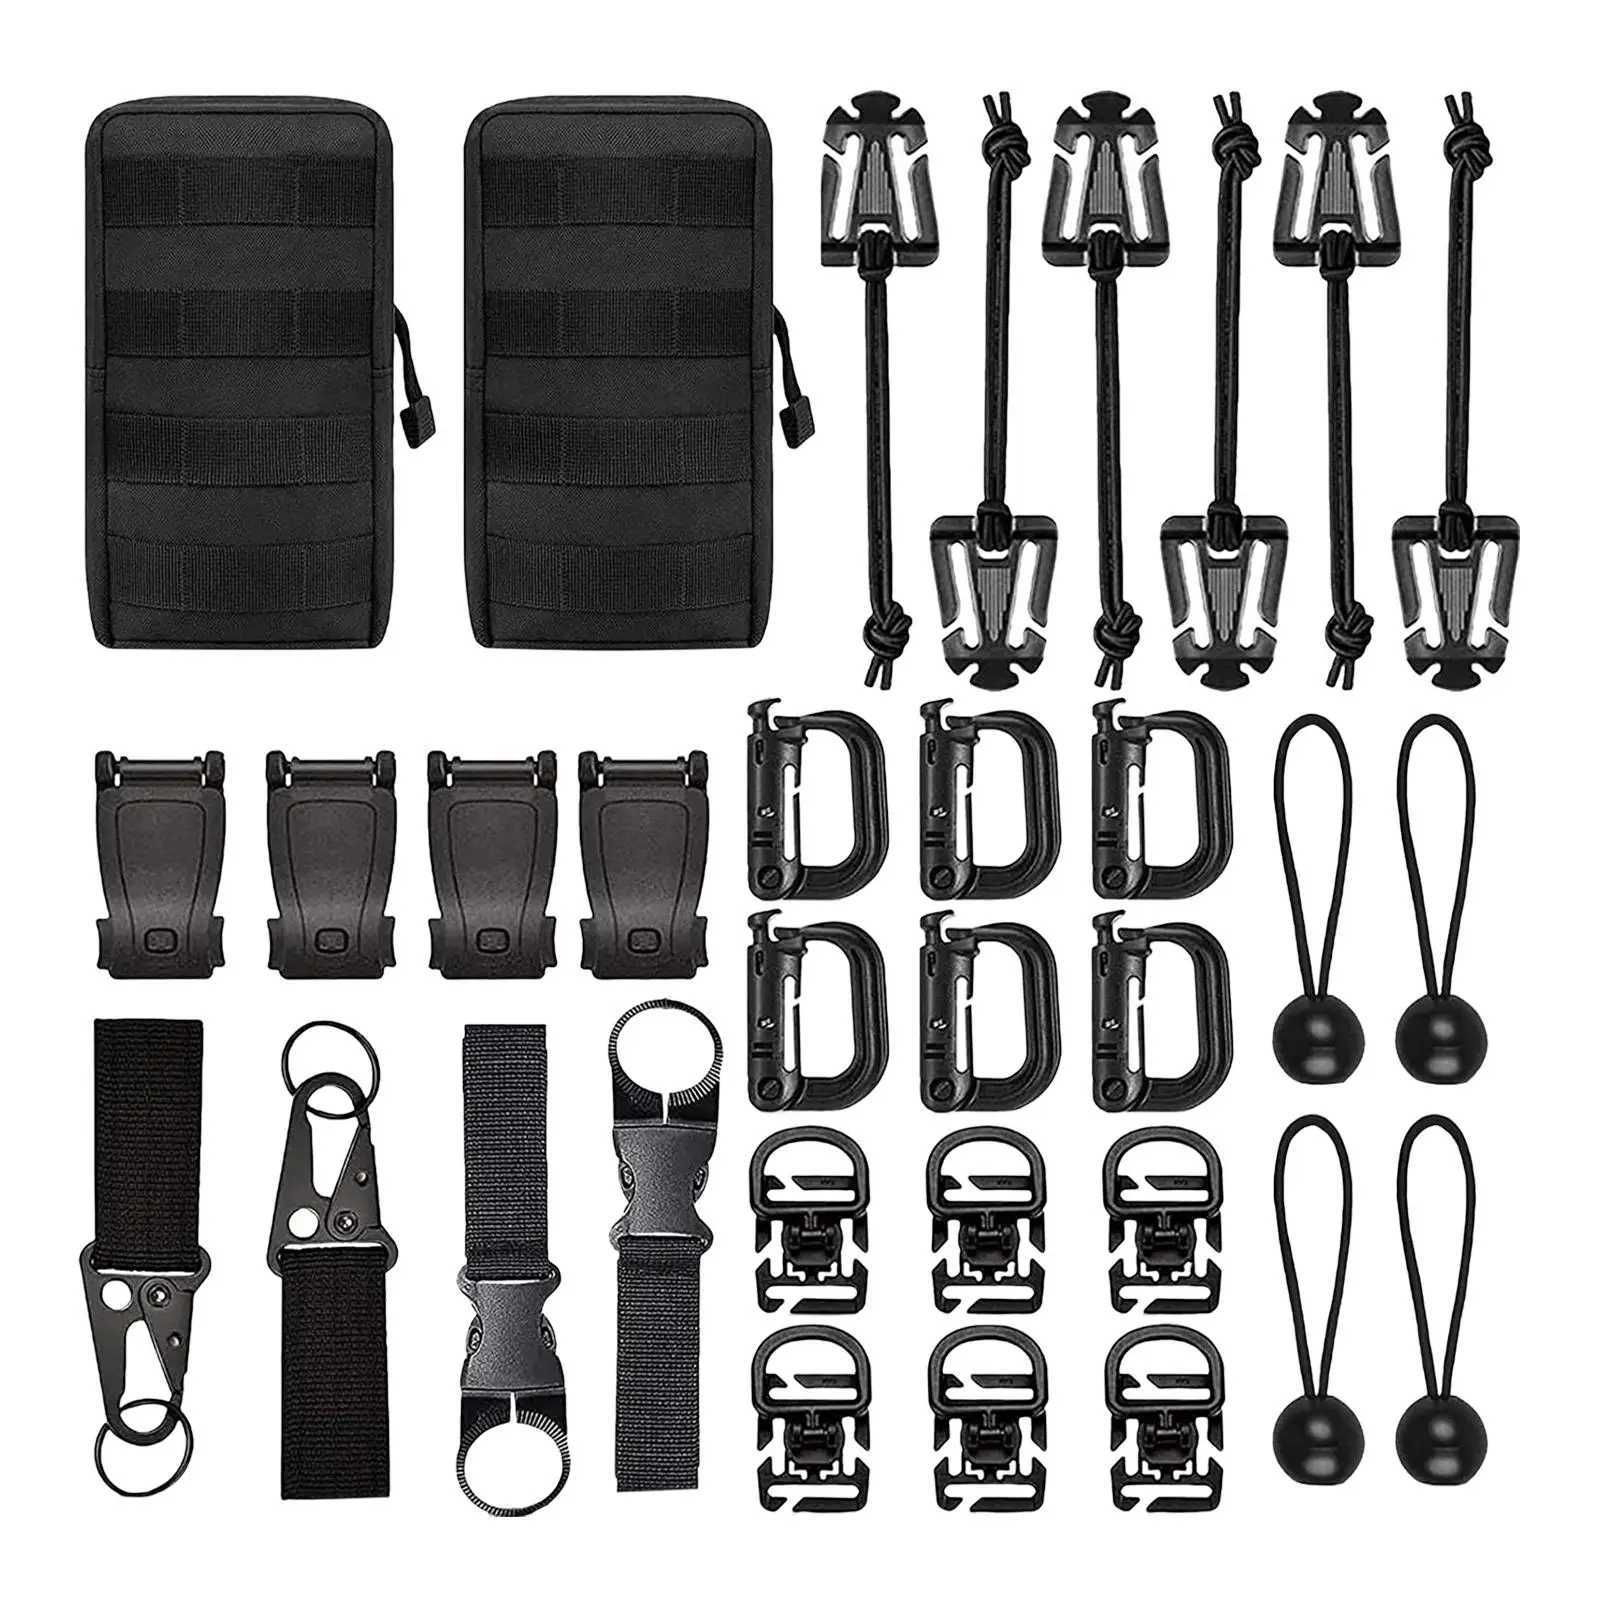 Molle Accessories Kit Attachments Waist Bag Pouch for Camping Mountaineering